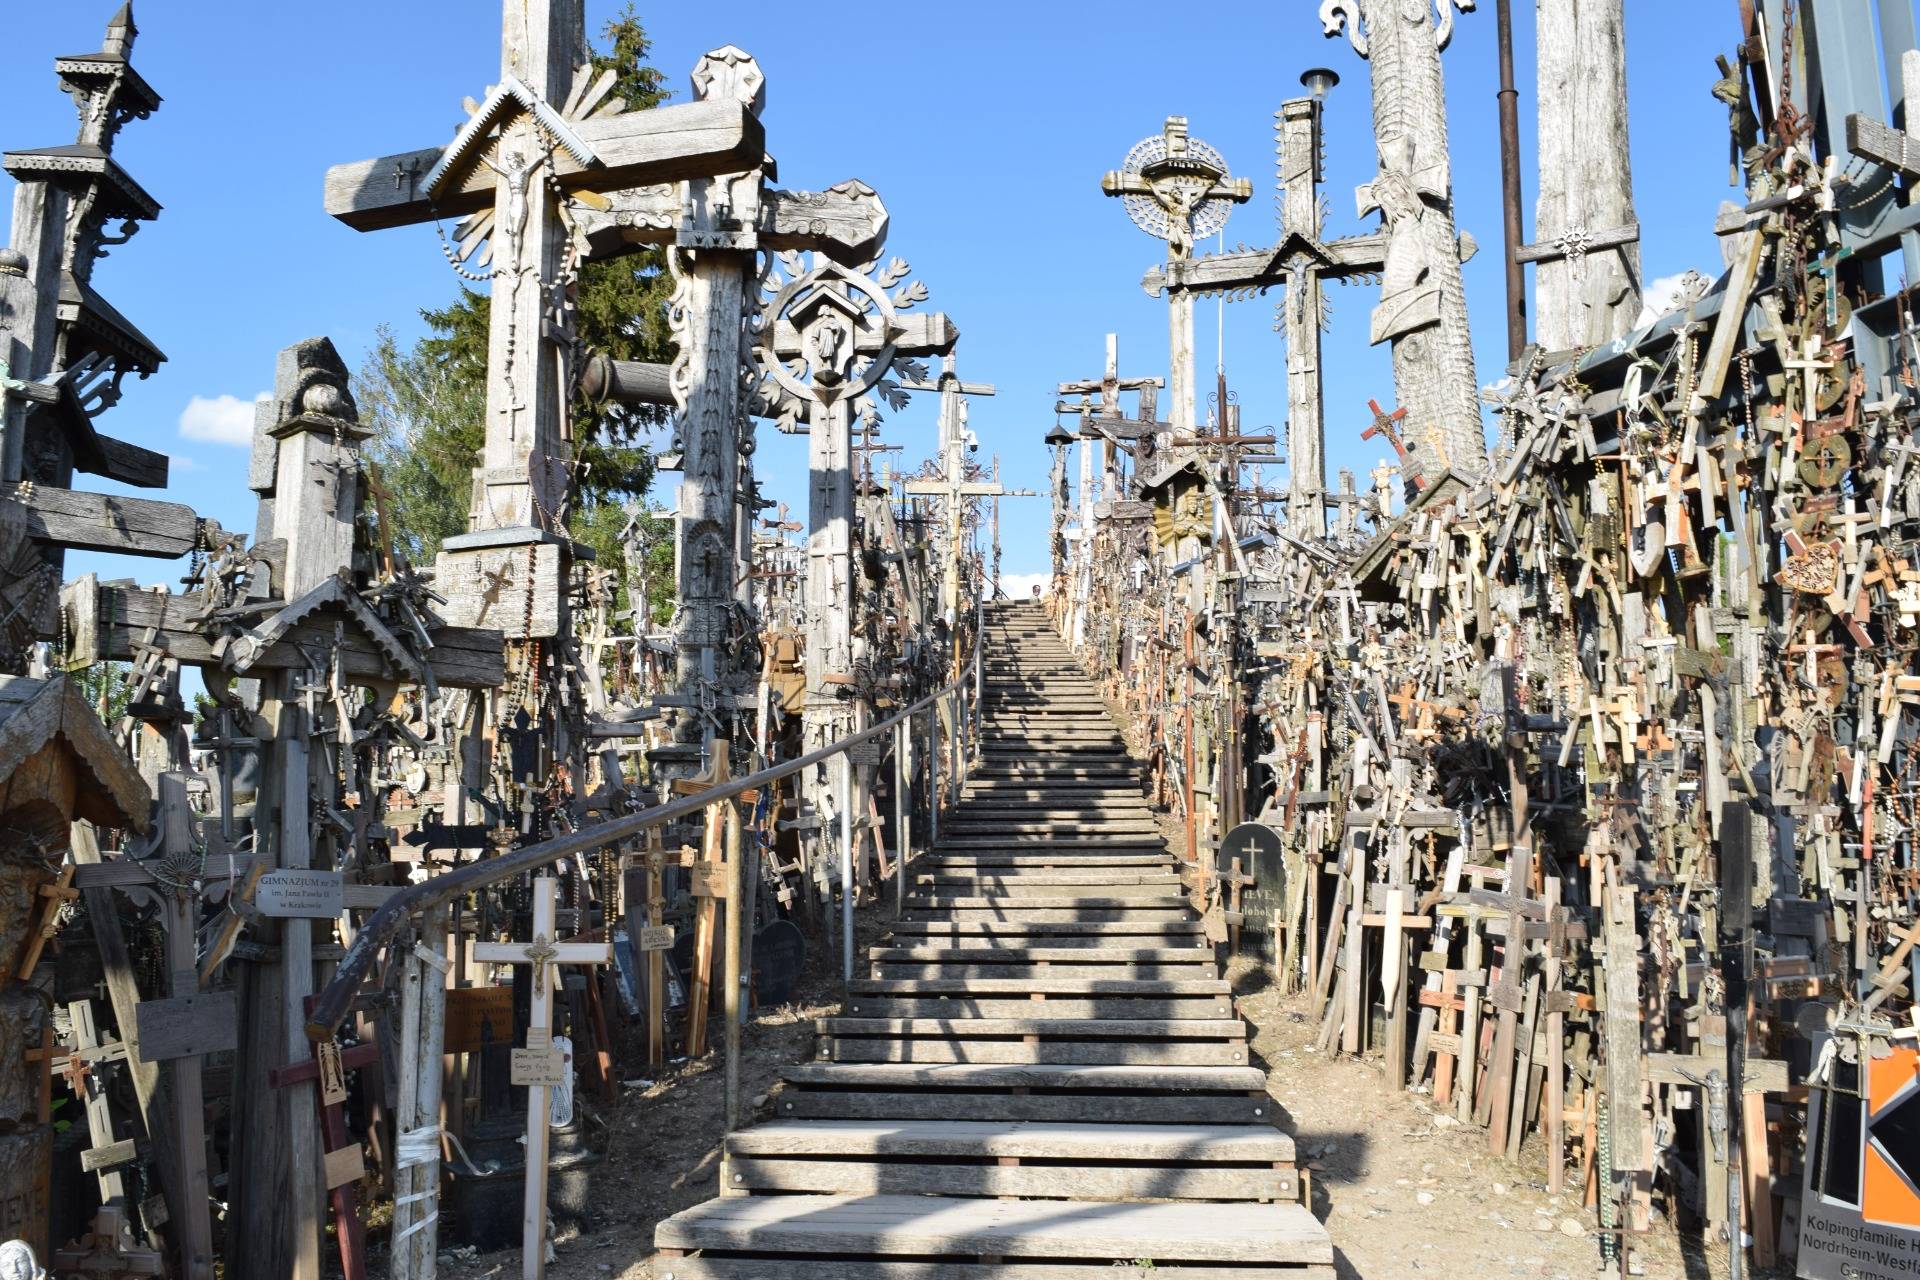 Hill of Crosses - Lithuania